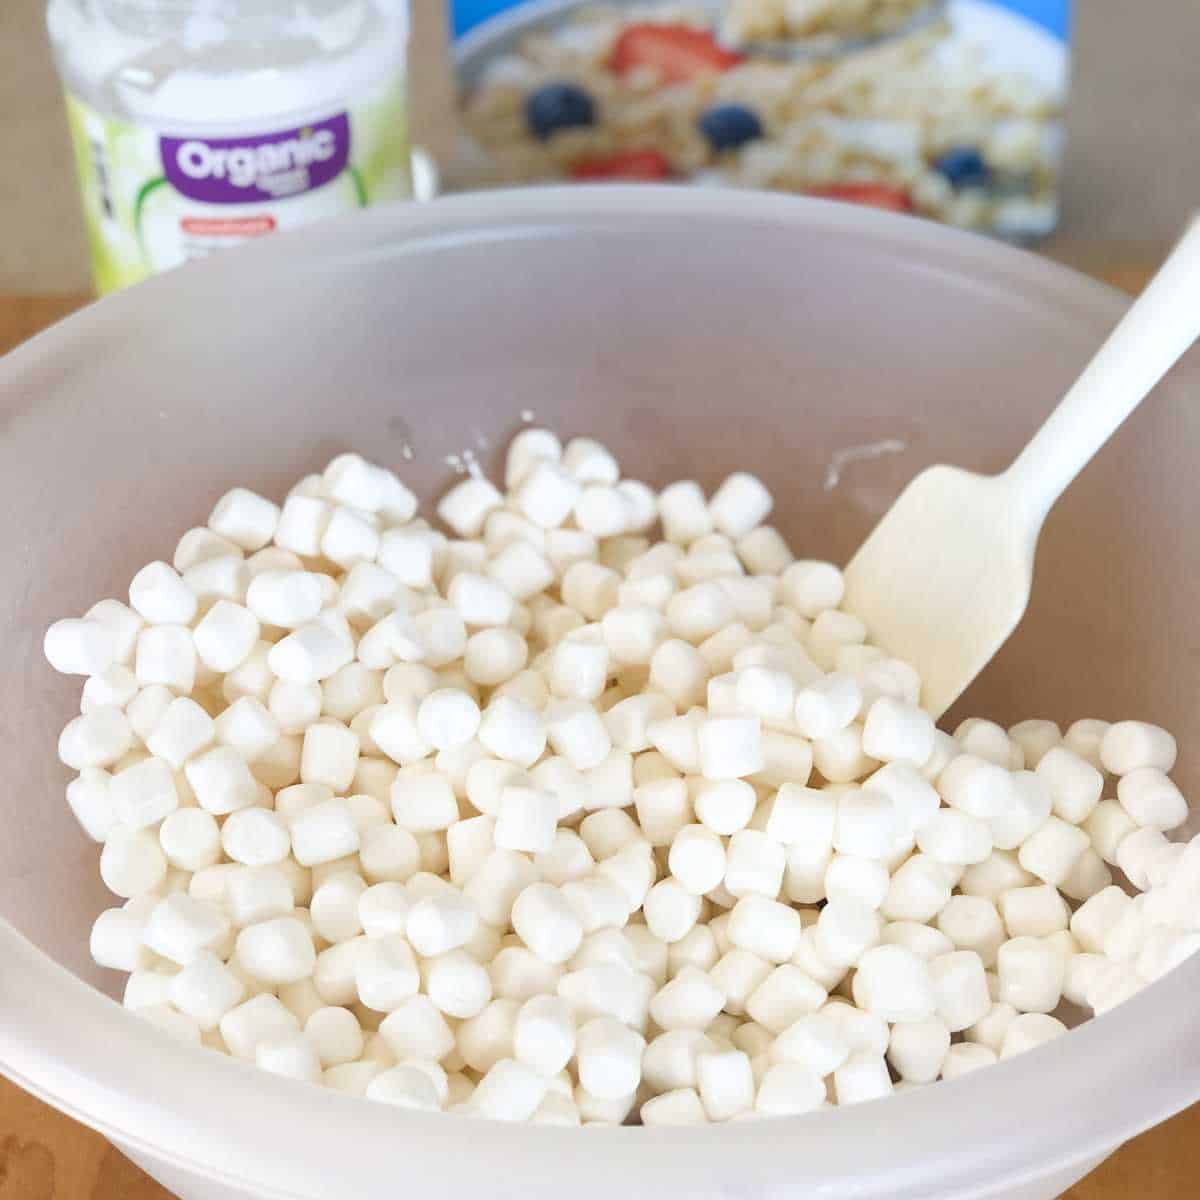 Mini marshmallows tossed in melted coconut oil.